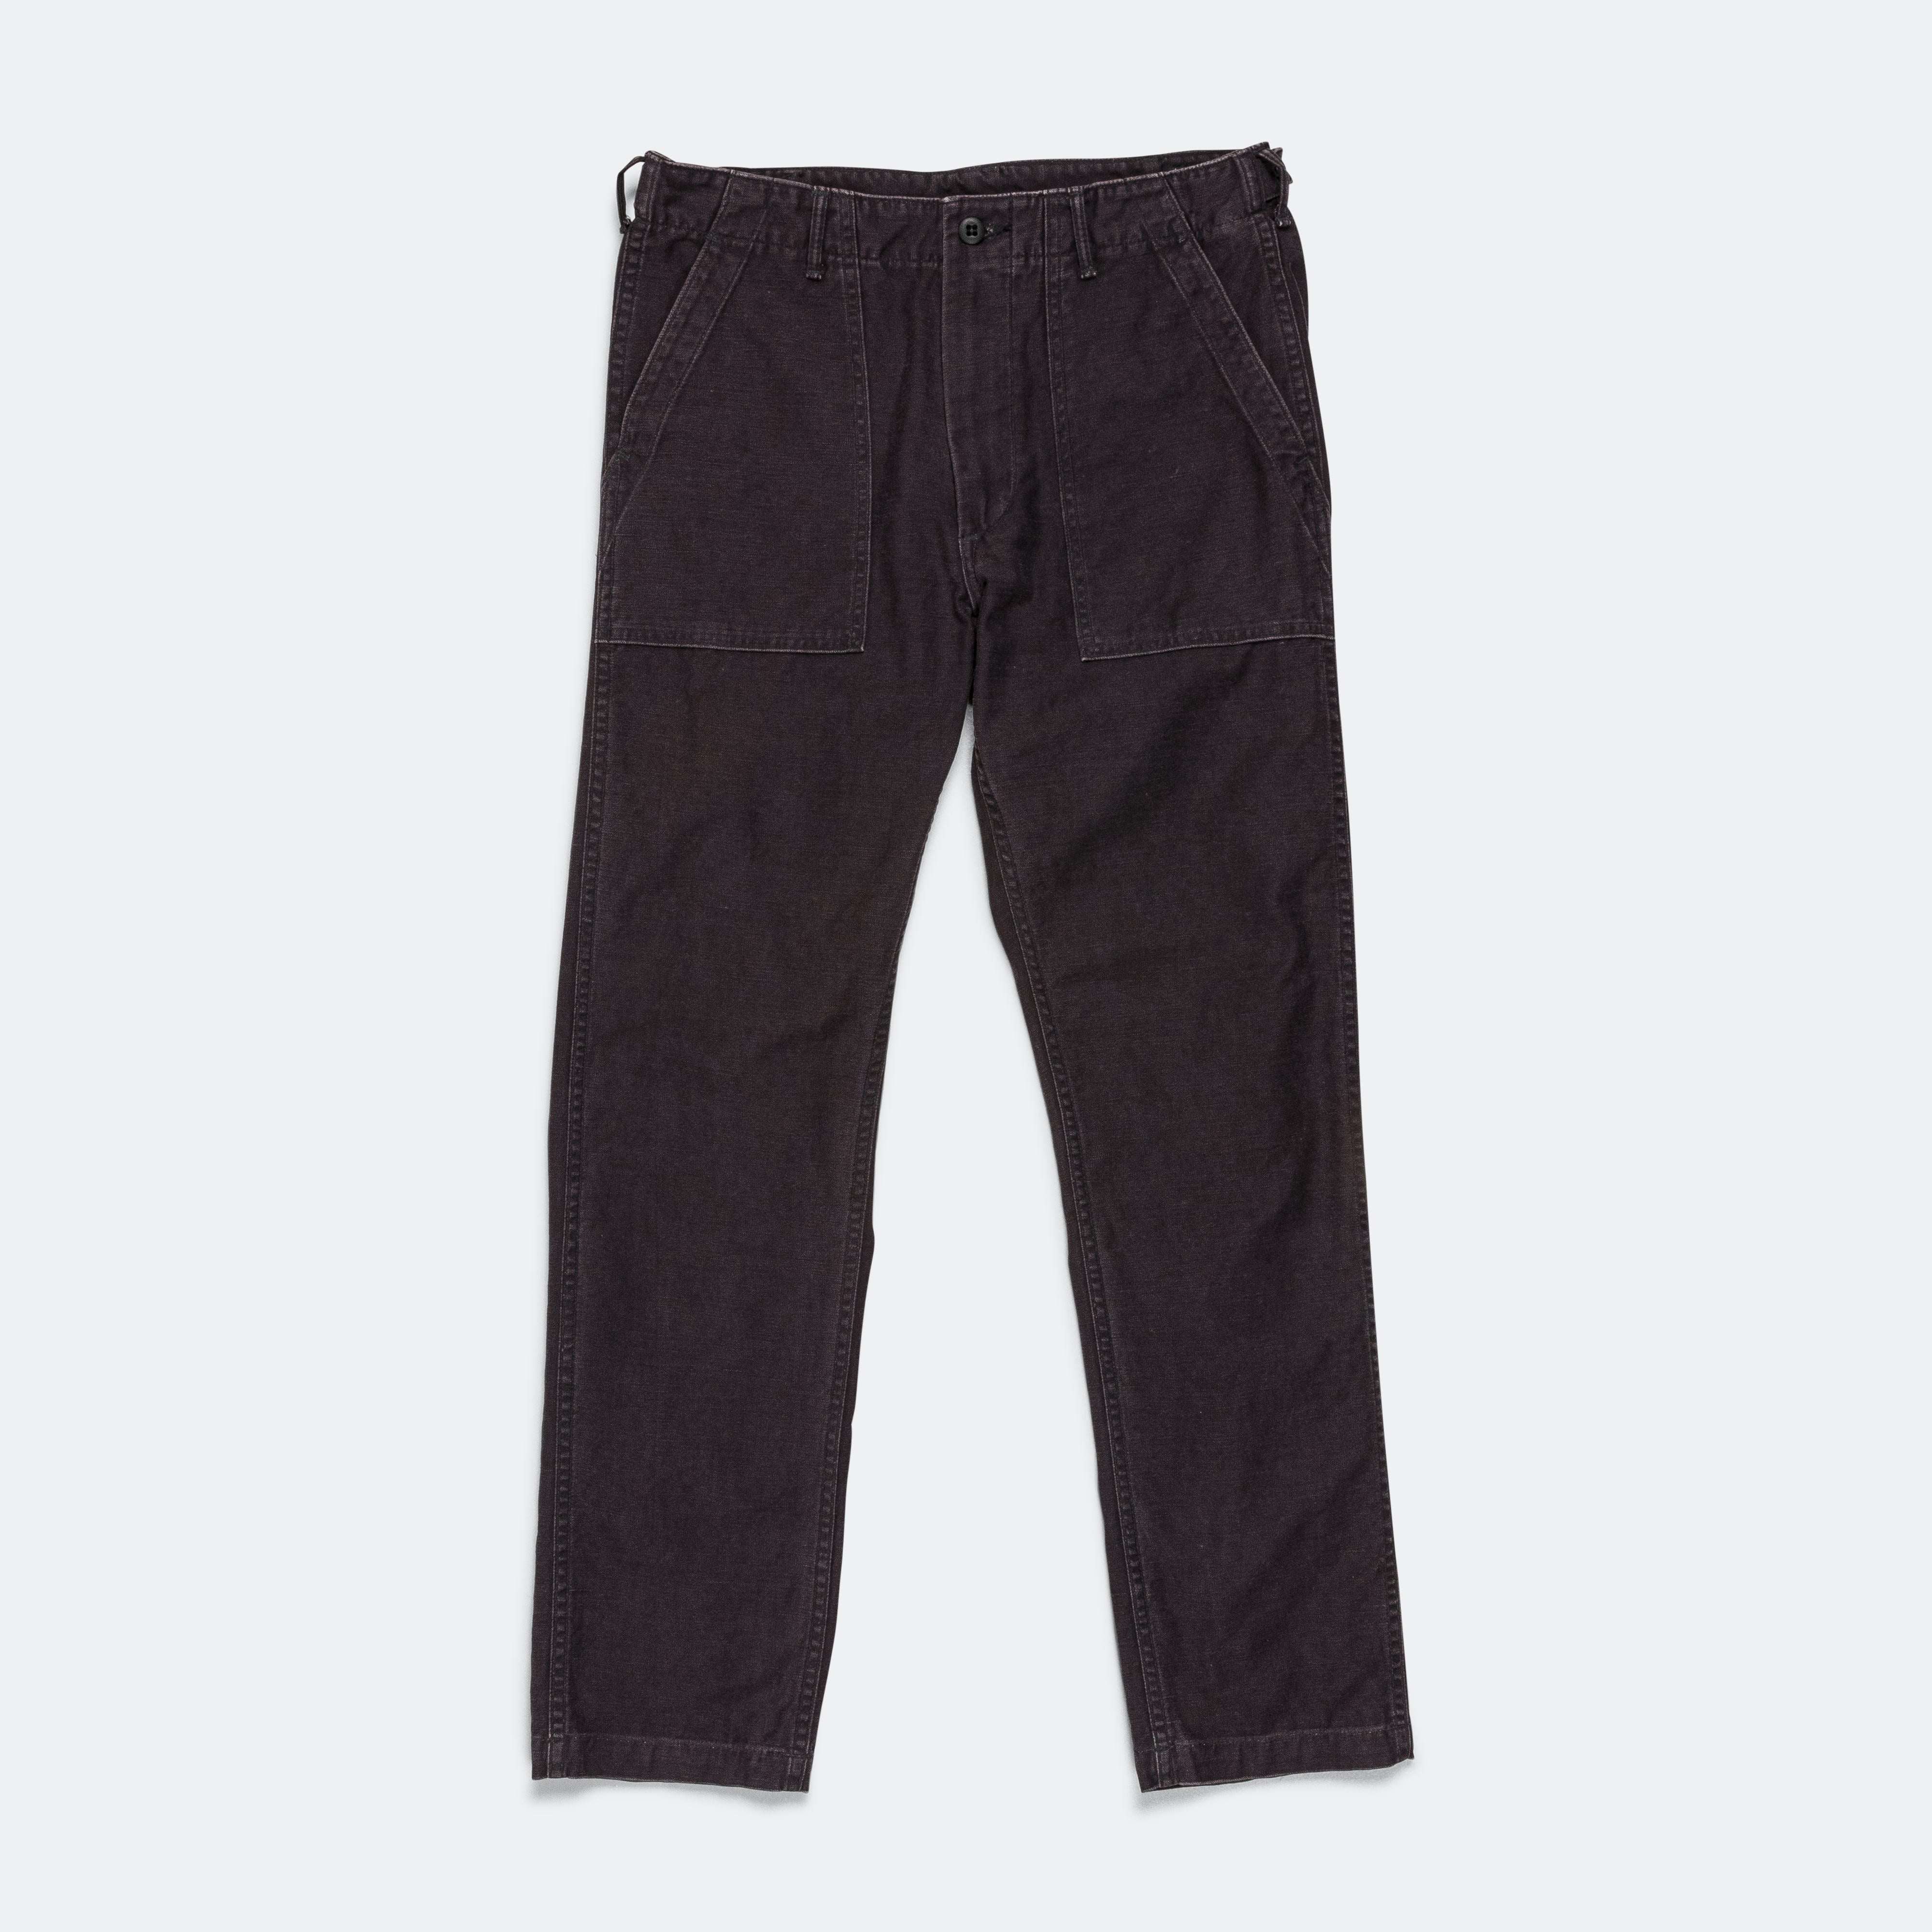 orSlow Slim Fit Fatigue Pants - Black Stonewash | Up There | UP THERE